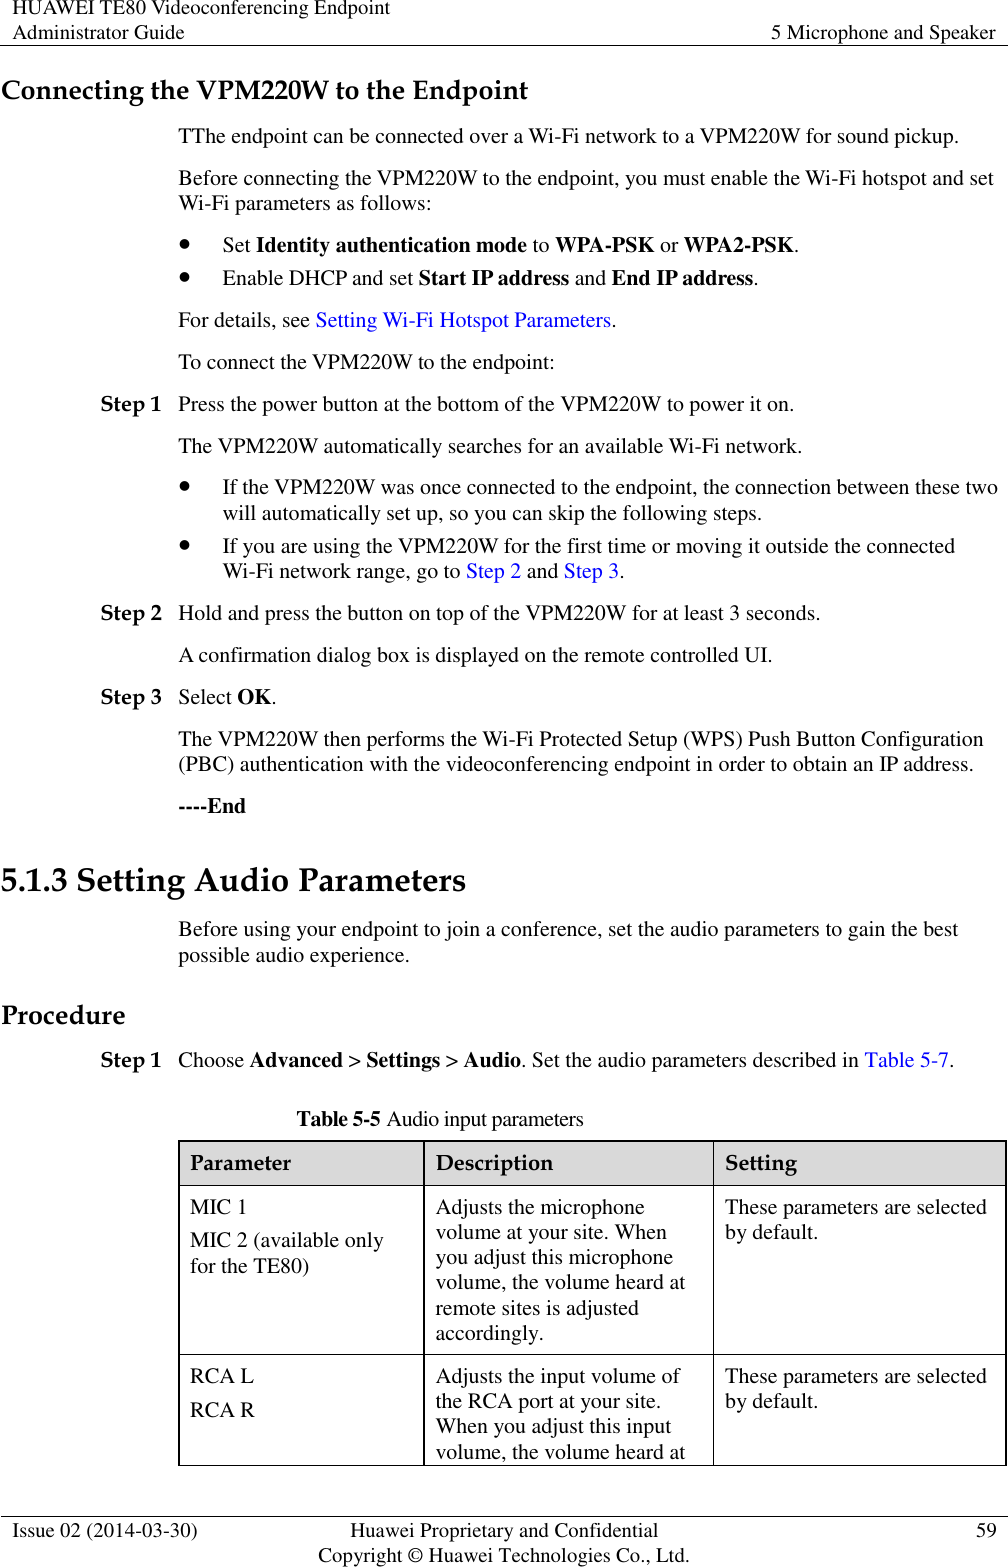 HUAWEI TE80 Videoconferencing Endpoint Administrator Guide 5 Microphone and Speaker  Issue 02 (2014-03-30) Huawei Proprietary and Confidential Copyright © Huawei Technologies Co., Ltd. 59  Connecting the VPM220W to the Endpoint TThe endpoint can be connected over a Wi-Fi network to a VPM220W for sound pickup. Before connecting the VPM220W to the endpoint, you must enable the Wi-Fi hotspot and set Wi-Fi parameters as follows:  Set Identity authentication mode to WPA-PSK or WPA2-PSK.  Enable DHCP and set Start IP address and End IP address. For details, see Setting Wi-Fi Hotspot Parameters. To connect the VPM220W to the endpoint: Step 1 Press the power button at the bottom of the VPM220W to power it on. The VPM220W automatically searches for an available Wi-Fi network.  If the VPM220W was once connected to the endpoint, the connection between these two will automatically set up, so you can skip the following steps.  If you are using the VPM220W for the first time or moving it outside the connected Wi-Fi network range, go to Step 2 and Step 3.   Step 2 Hold and press the button on top of the VPM220W for at least 3 seconds. A confirmation dialog box is displayed on the remote controlled UI. Step 3 Select OK. The VPM220W then performs the Wi-Fi Protected Setup (WPS) Push Button Configuration (PBC) authentication with the videoconferencing endpoint in order to obtain an IP address. ----End 5.1.3 Setting Audio Parameters Before using your endpoint to join a conference, set the audio parameters to gain the best possible audio experience. Procedure Step 1 Choose Advanced &gt; Settings &gt; Audio. Set the audio parameters described in Table 5-7. Table 5-5 Audio input parameters Parameter Description Setting MIC 1 MIC 2 (available only for the TE80) Adjusts the microphone volume at your site. When you adjust this microphone volume, the volume heard at remote sites is adjusted accordingly. These parameters are selected by default. RCA L RCA R Adjusts the input volume of the RCA port at your site. When you adjust this input volume, the volume heard at These parameters are selected by default. 